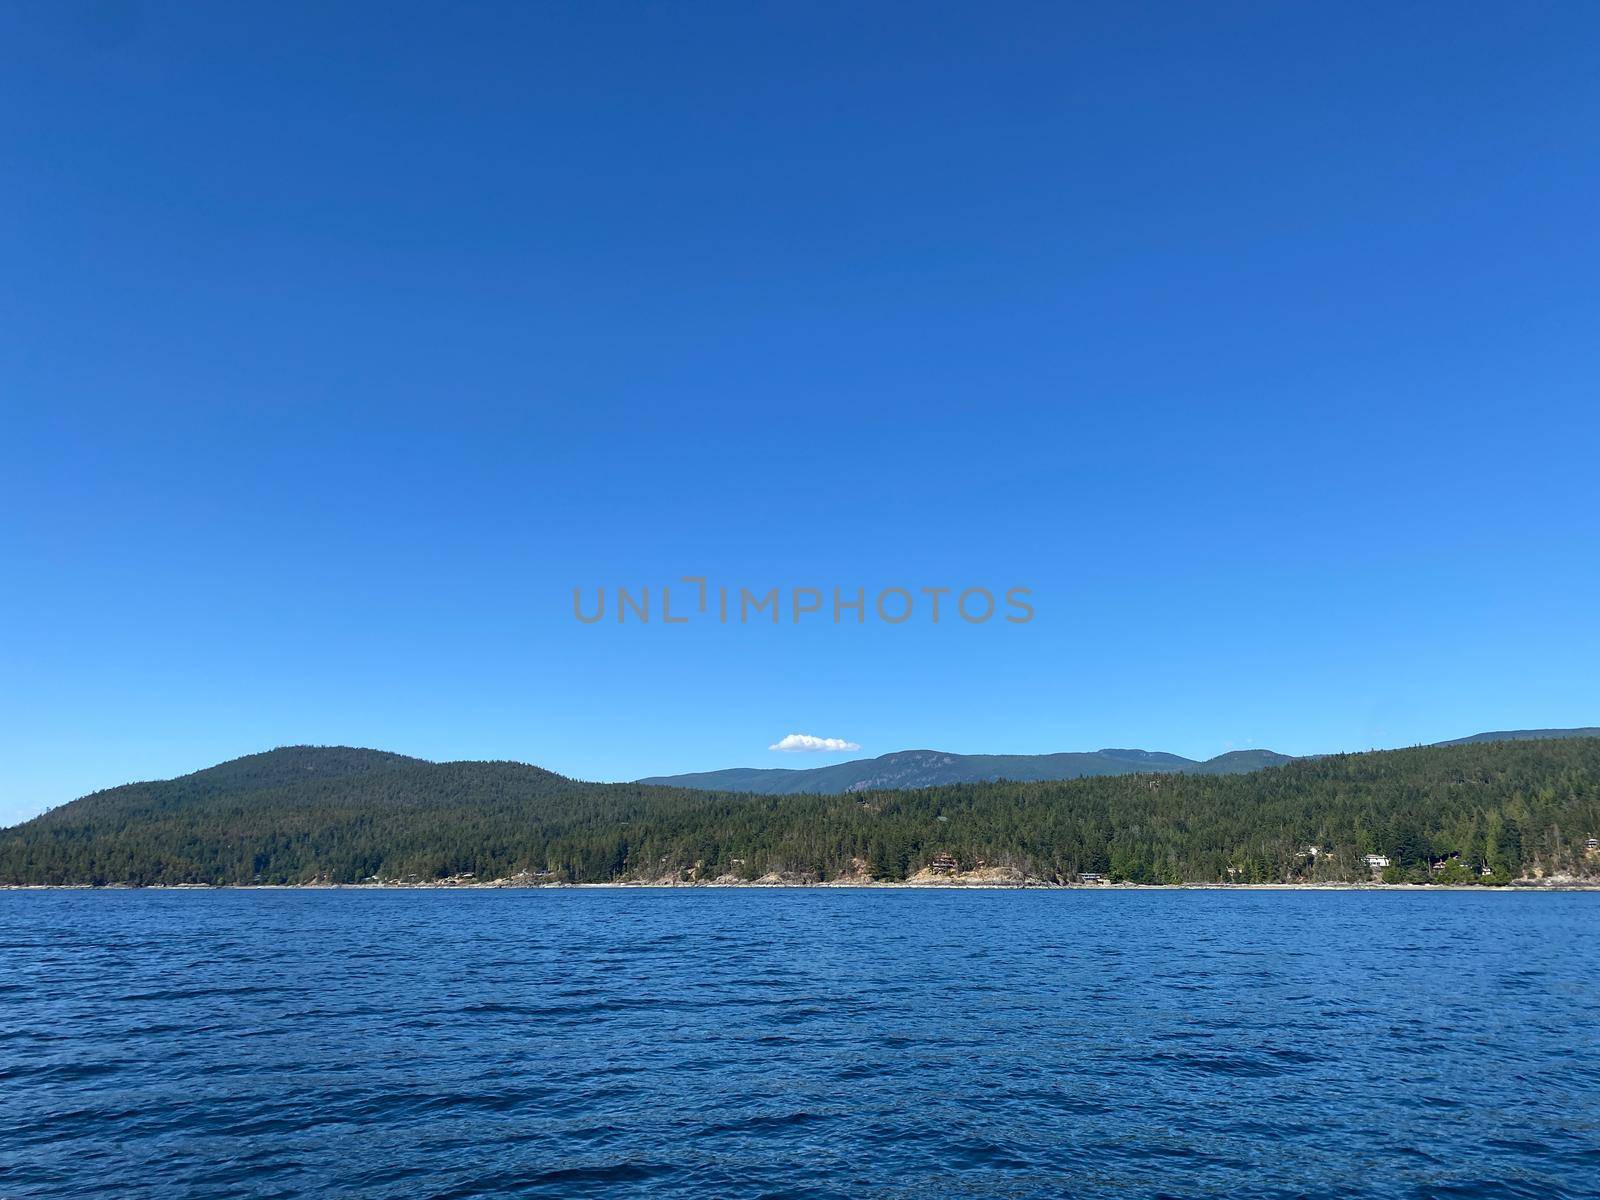 View of Sunshine Coast mountains from the water with blue skies and blue water, British Columbia